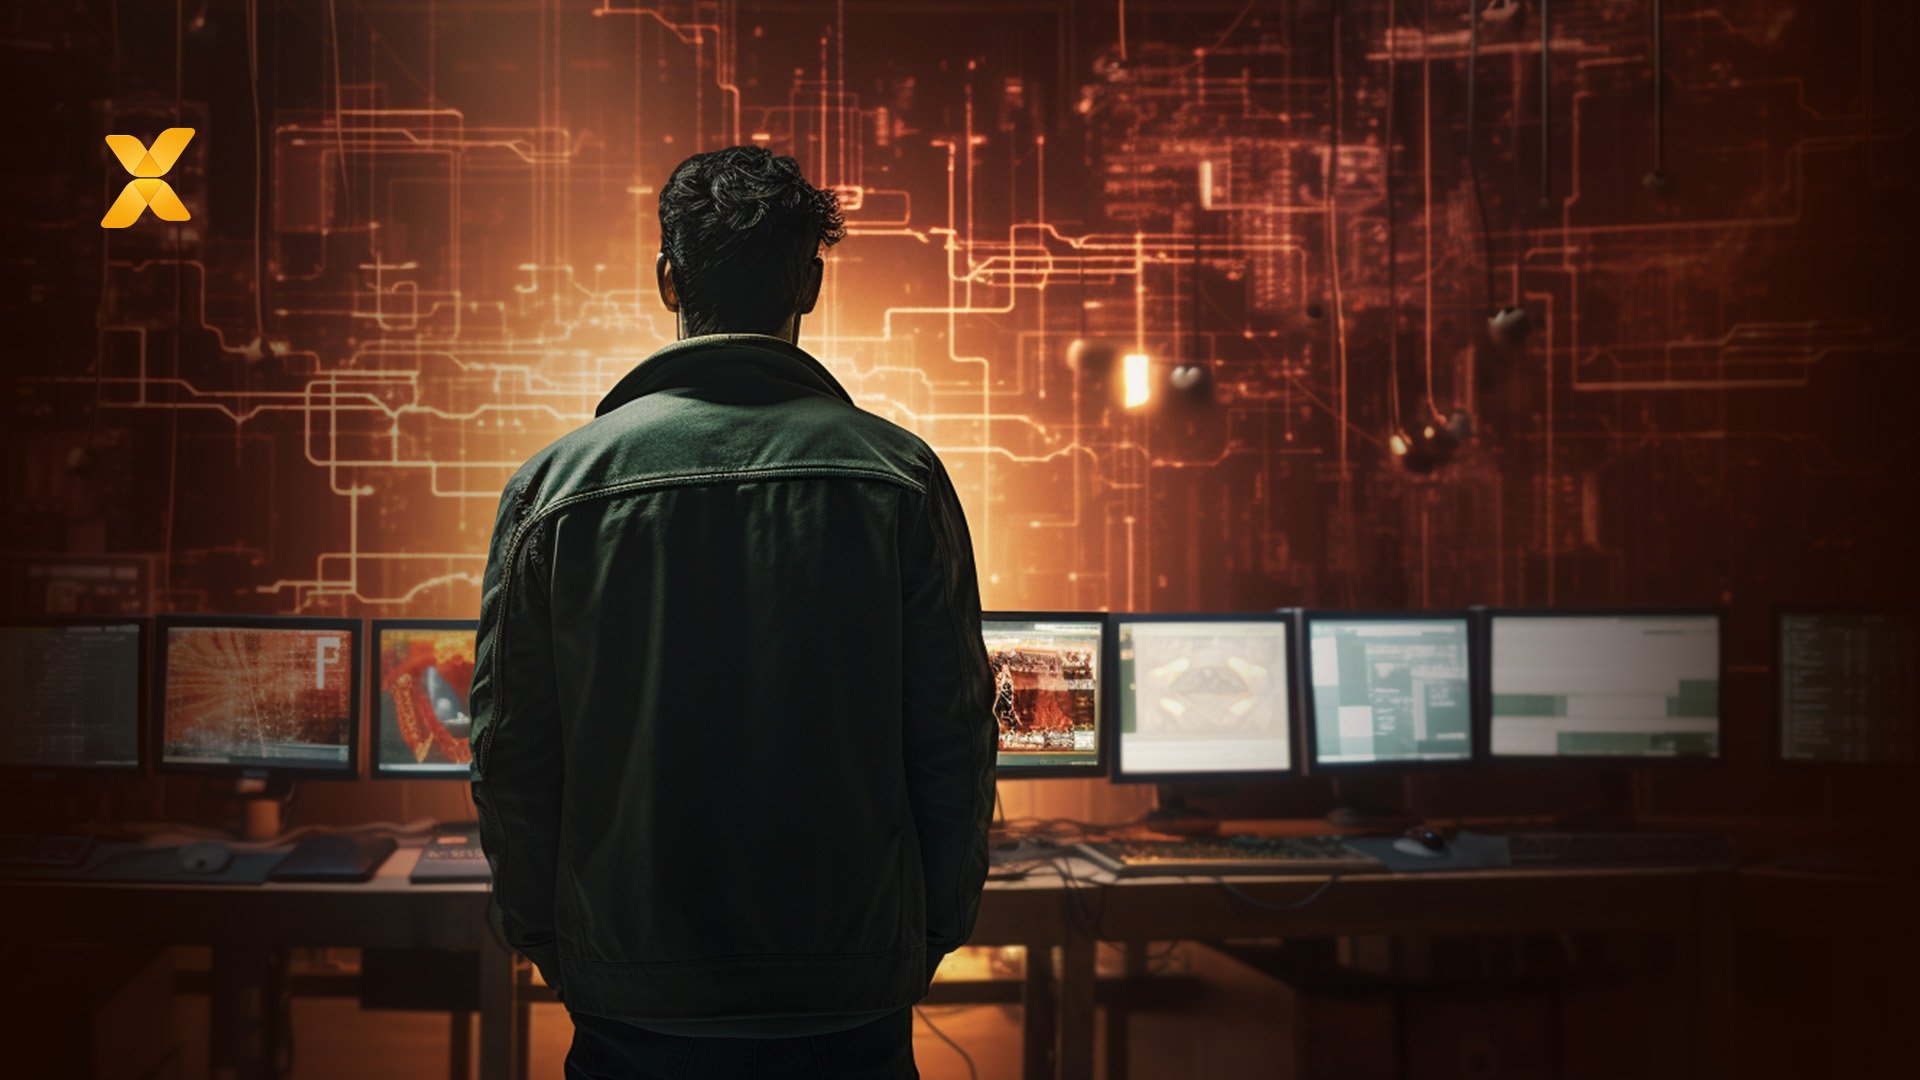 Image of man standing in front of computer screens